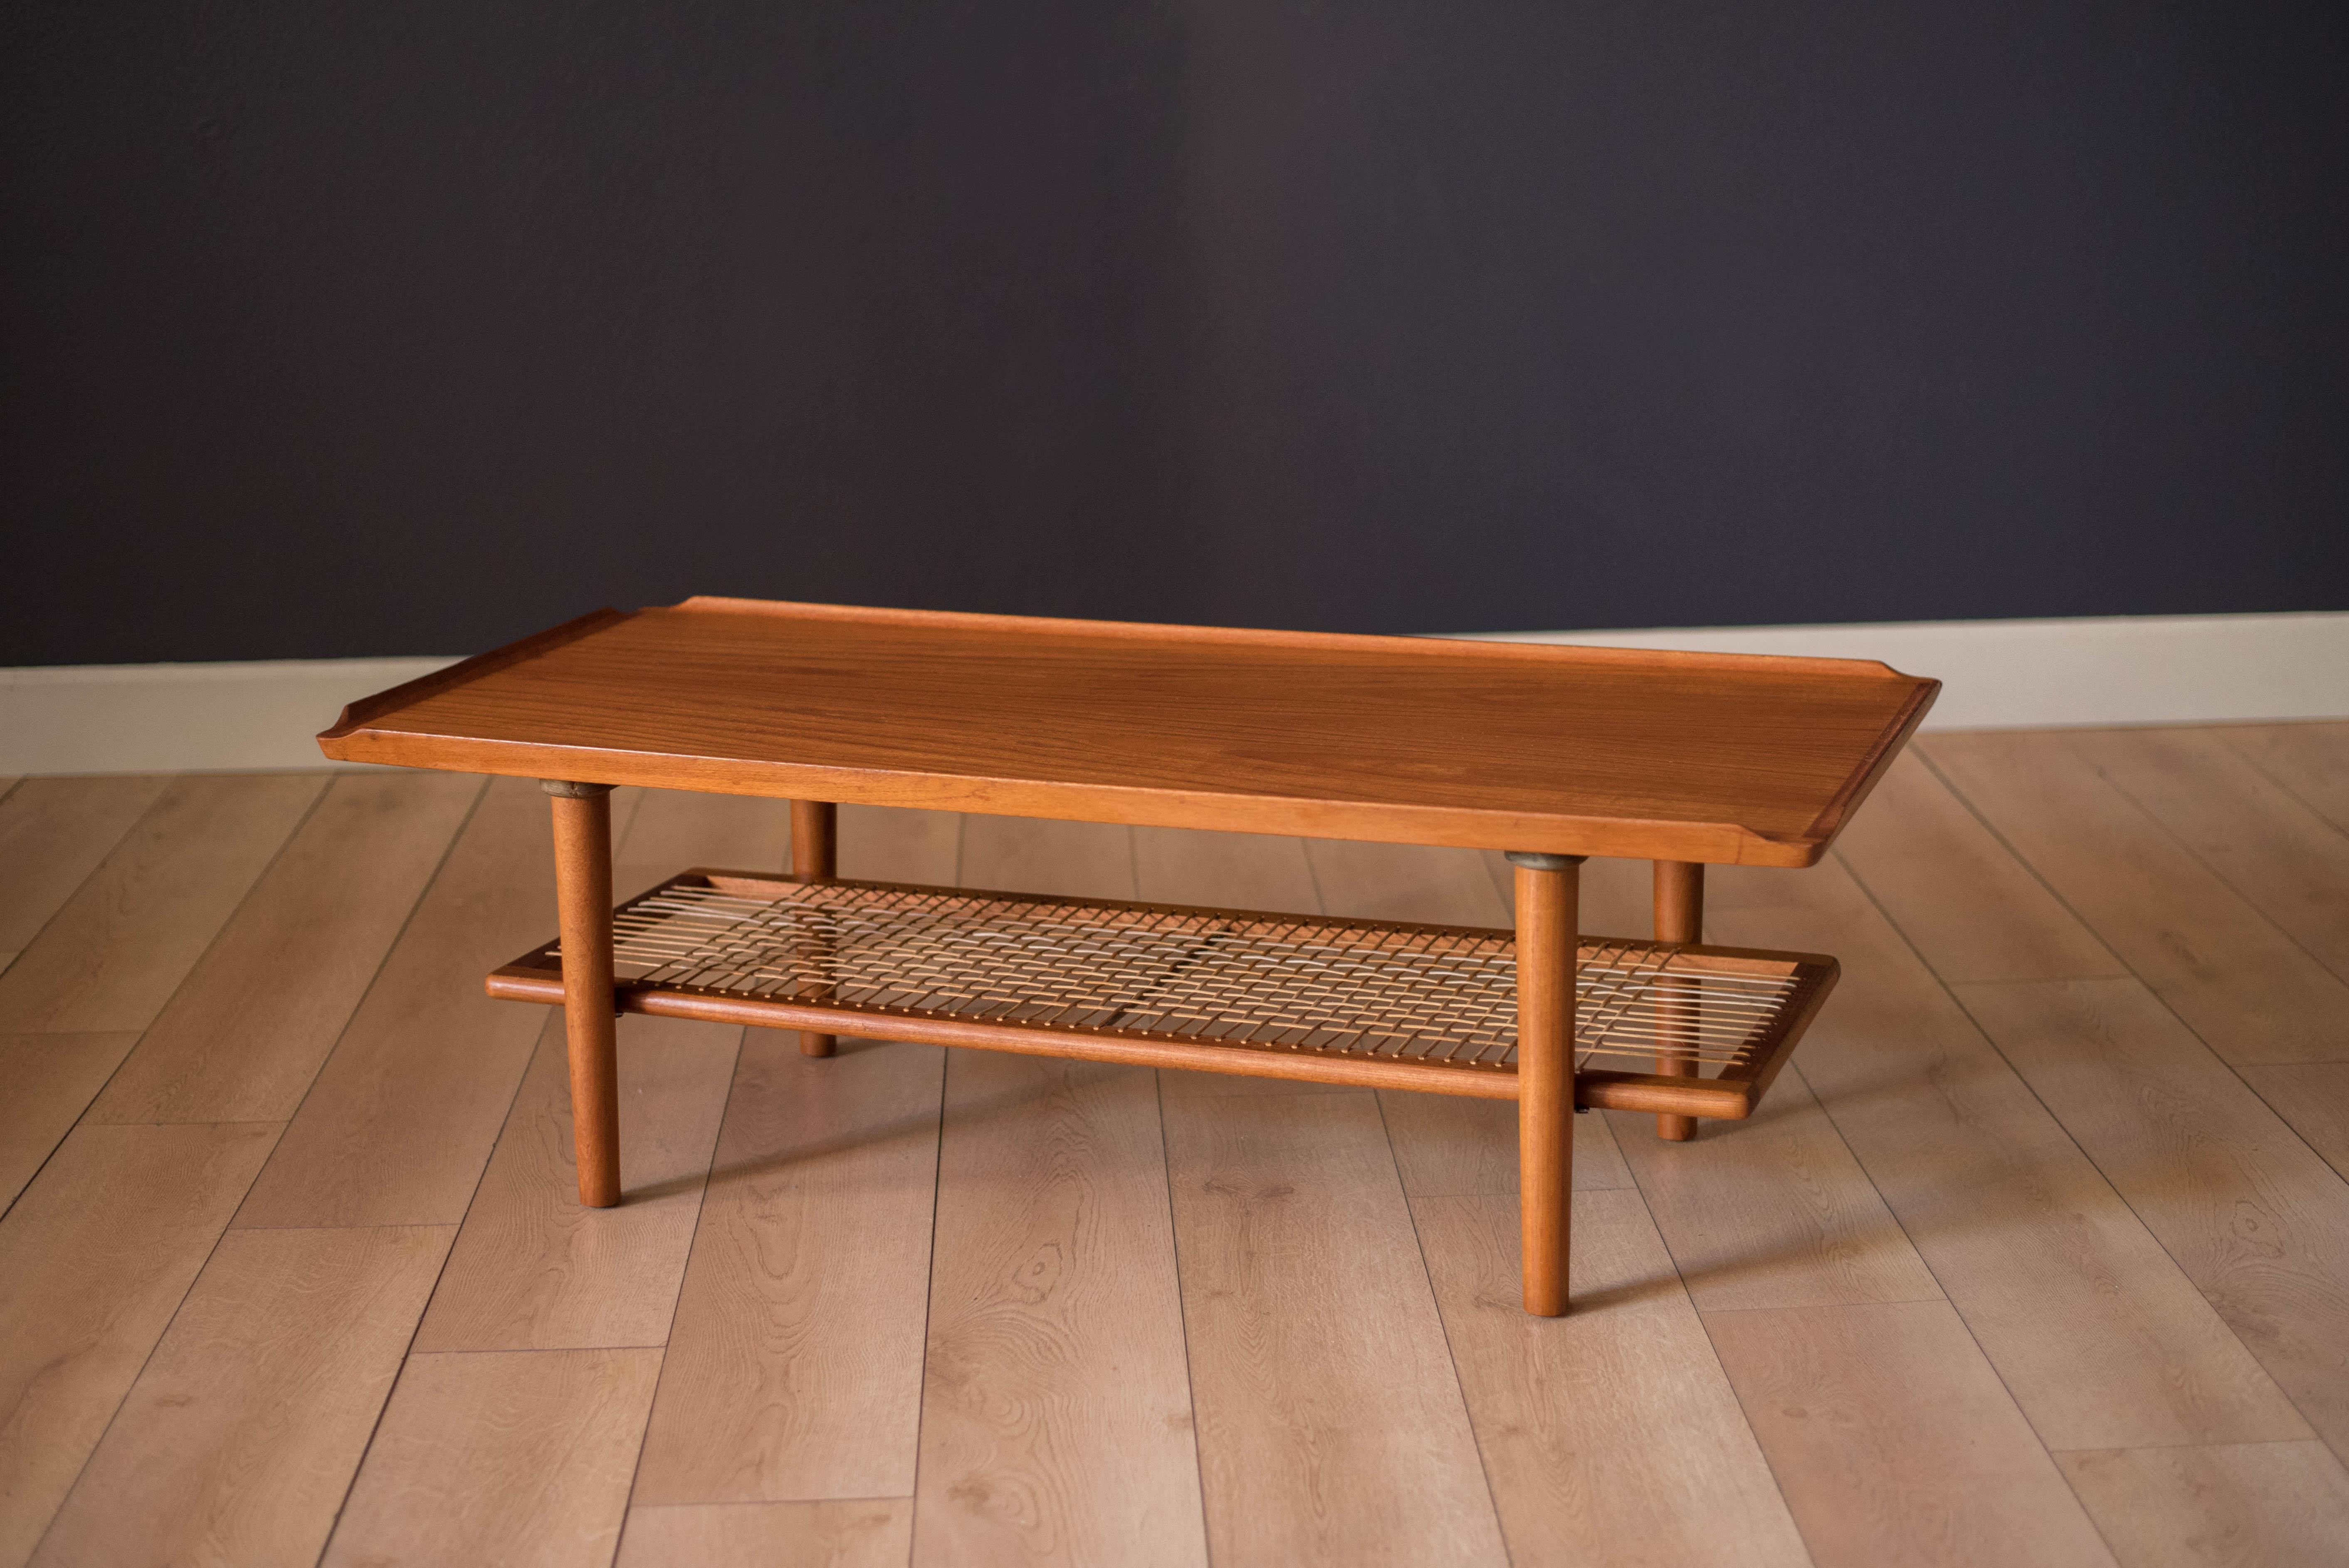 Mid-Century Modern coffee table attributed to Georg Jensen for Kubus. This piece features a unique sculpted border and a lower woven cane magazine shelf. Displays well from all angles.